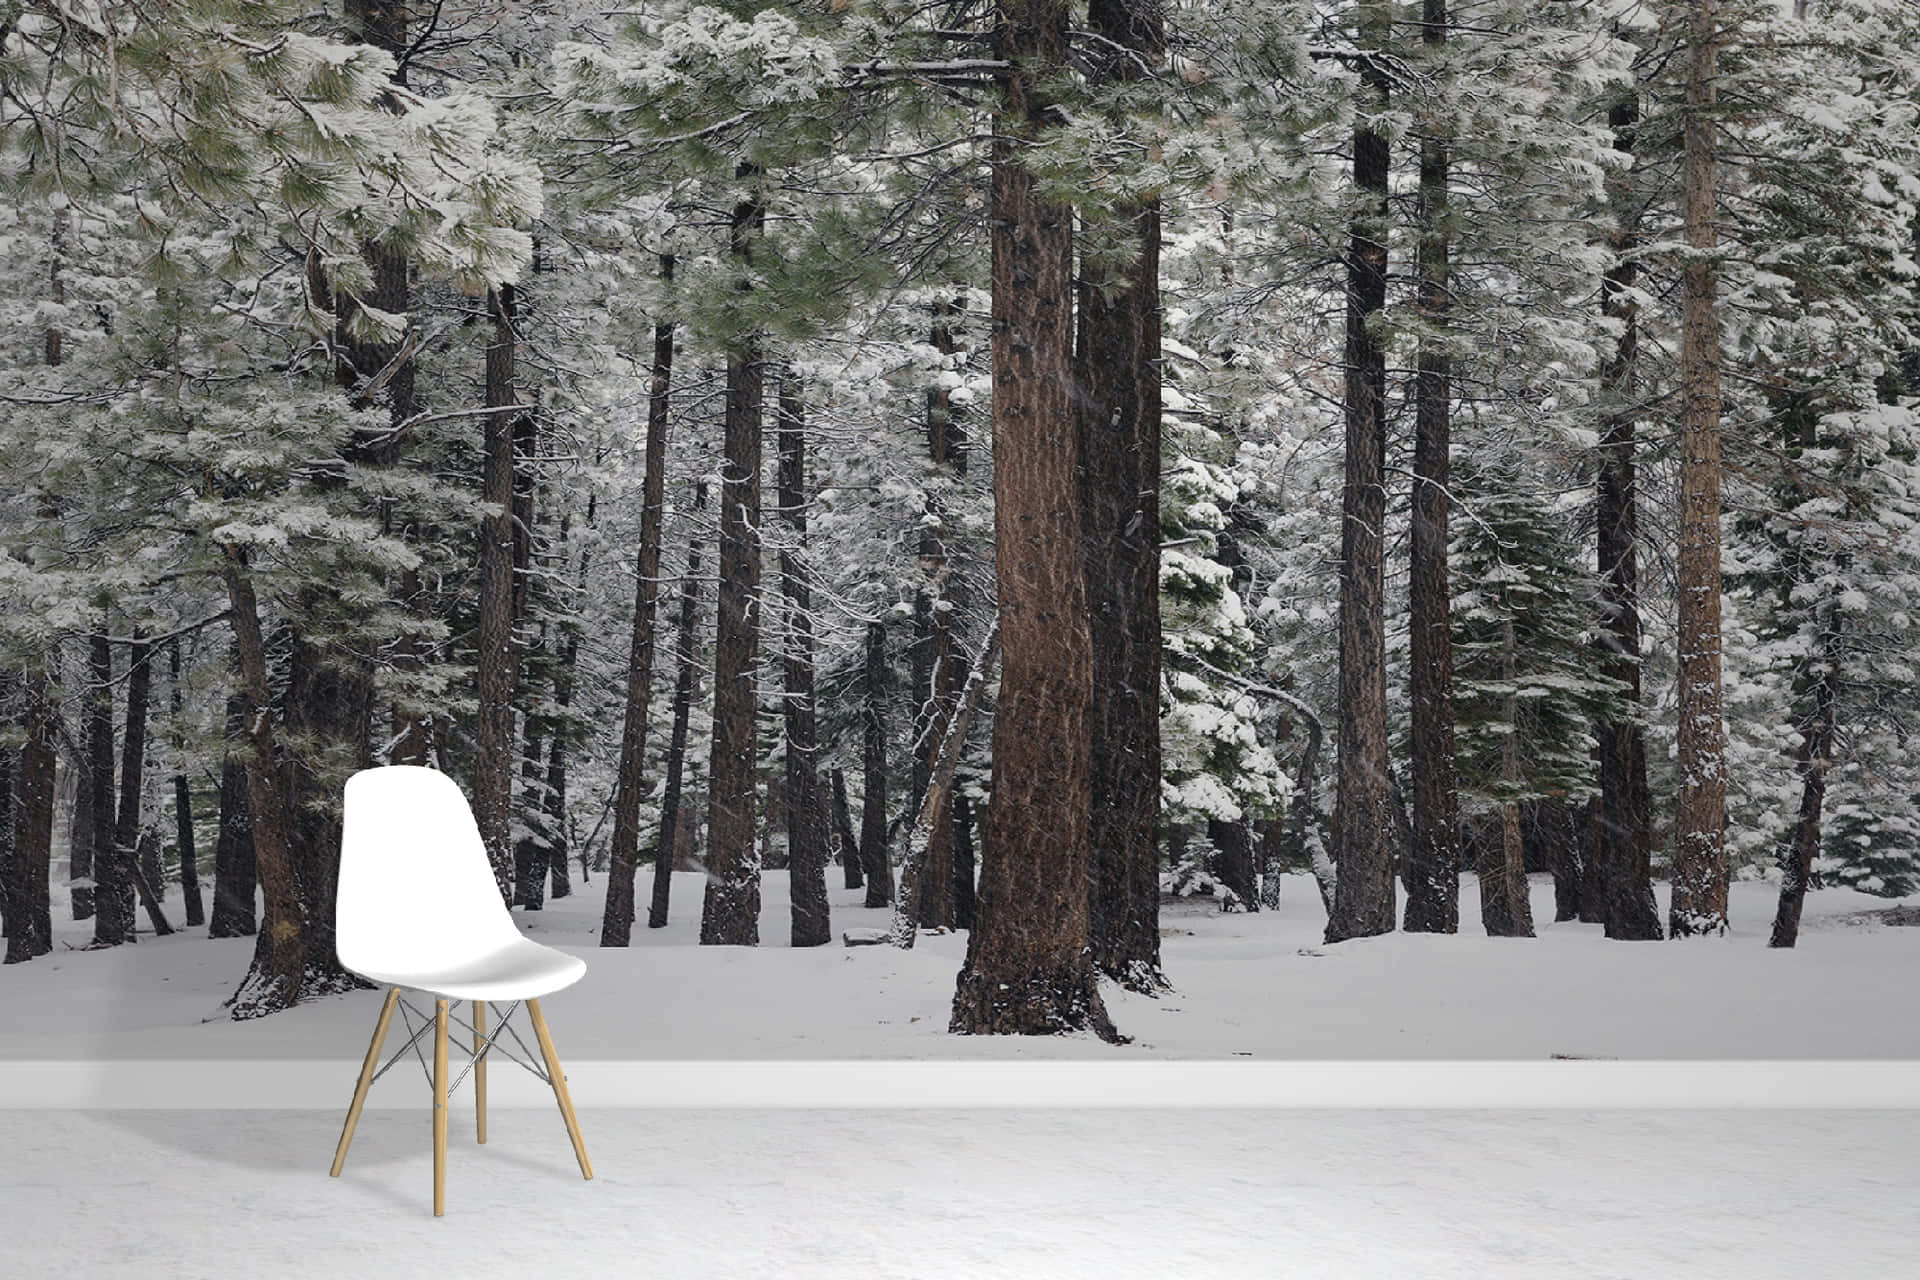 A Snowy Forest With A Chair And A White Wall